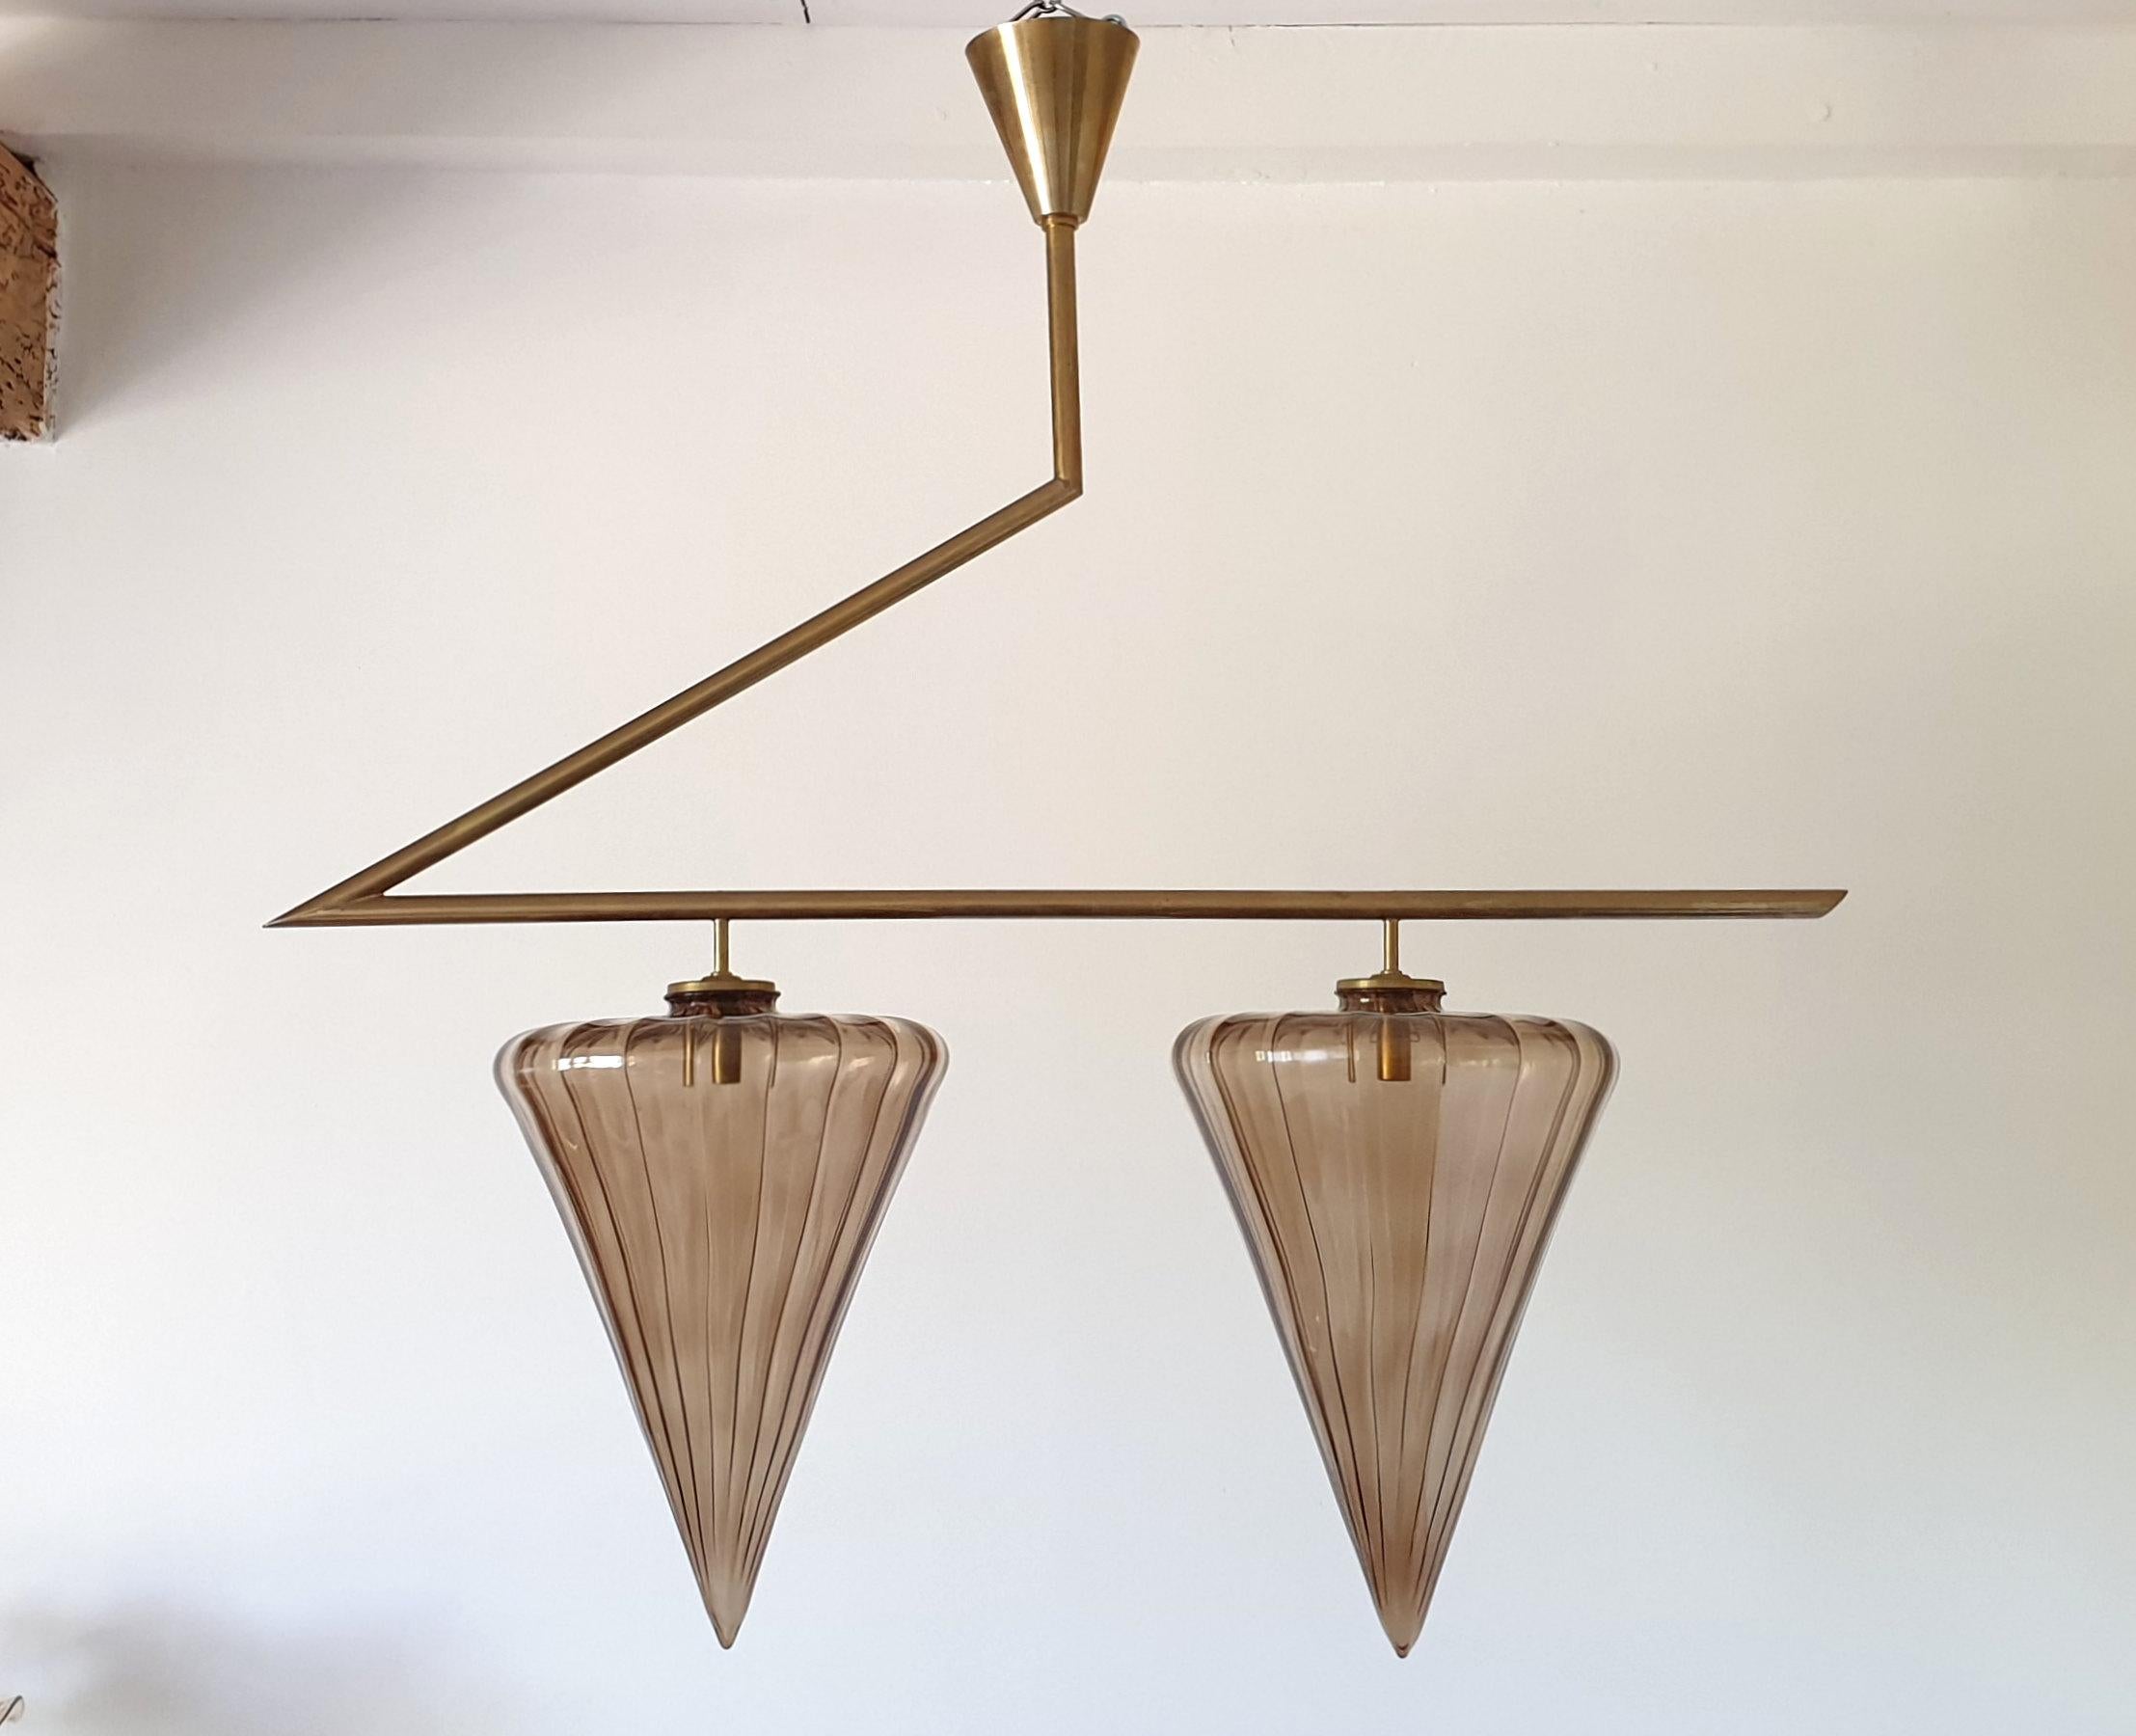 Large Mid-Century Modern chandelier, with a geometrical design, attributed to Seguso, Italy, 1970s.
The chandelier is made of polished brass, and two Murano glass taupe shades, nesting one light each.
The vintage chandelier has been rewired for the